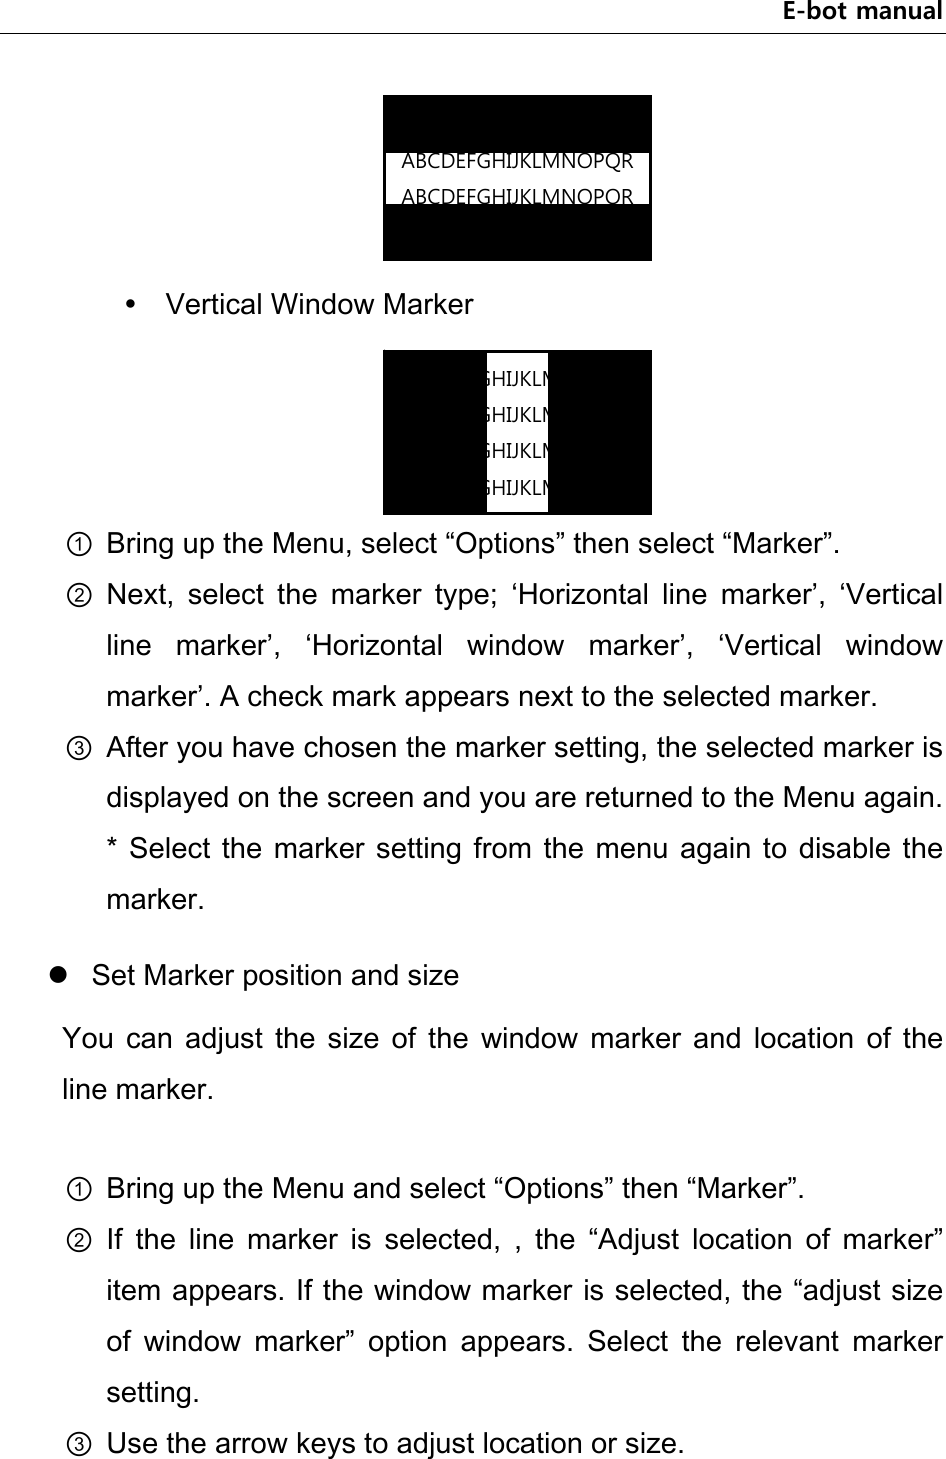 E-bot manual      Vertical Window Marker     ① Bring up the Menu, select “Options” then select “Marker”. ② Next,  select  the  marker  type;  ‘Horizontal  line  marker’,  ‘Vertical line  marker’,  ‘Horizontal  window  marker’,  ‘Vertical  window marker’. A check mark appears next to the selected marker. ③ After you have chosen the marker setting, the selected marker is displayed on the screen and you are returned to the Menu again. * Select the marker  setting  from  the  menu  again  to  disable the marker.  Set Marker position and size You  can  adjust  the  size  of  the  window  marker  and  location  of  the line marker.  ① Bring up the Menu and select “Options” then “Marker”. ② If  the  line  marker  is  selected,  ,  the  “Adjust  location  of  marker” item appears. If the window marker is selected, the “adjust size of  window  marker”  option  appears.  Select  the  relevant  marker setting. ③ Use the arrow keys to adjust location or size.   ABCDEFGHIJKLMNOPQRABCDEFGHIJKLMNOPQRABCDEFGHIJKLMNOPQRABCDEFGHIJKLMNOPQRABCDEFGHIJKLMNOPQRABCDEFGHIJKLMNOPQRABCDEFGHIJKLMNOPQRABCDEFGHIJKLMNOPQR